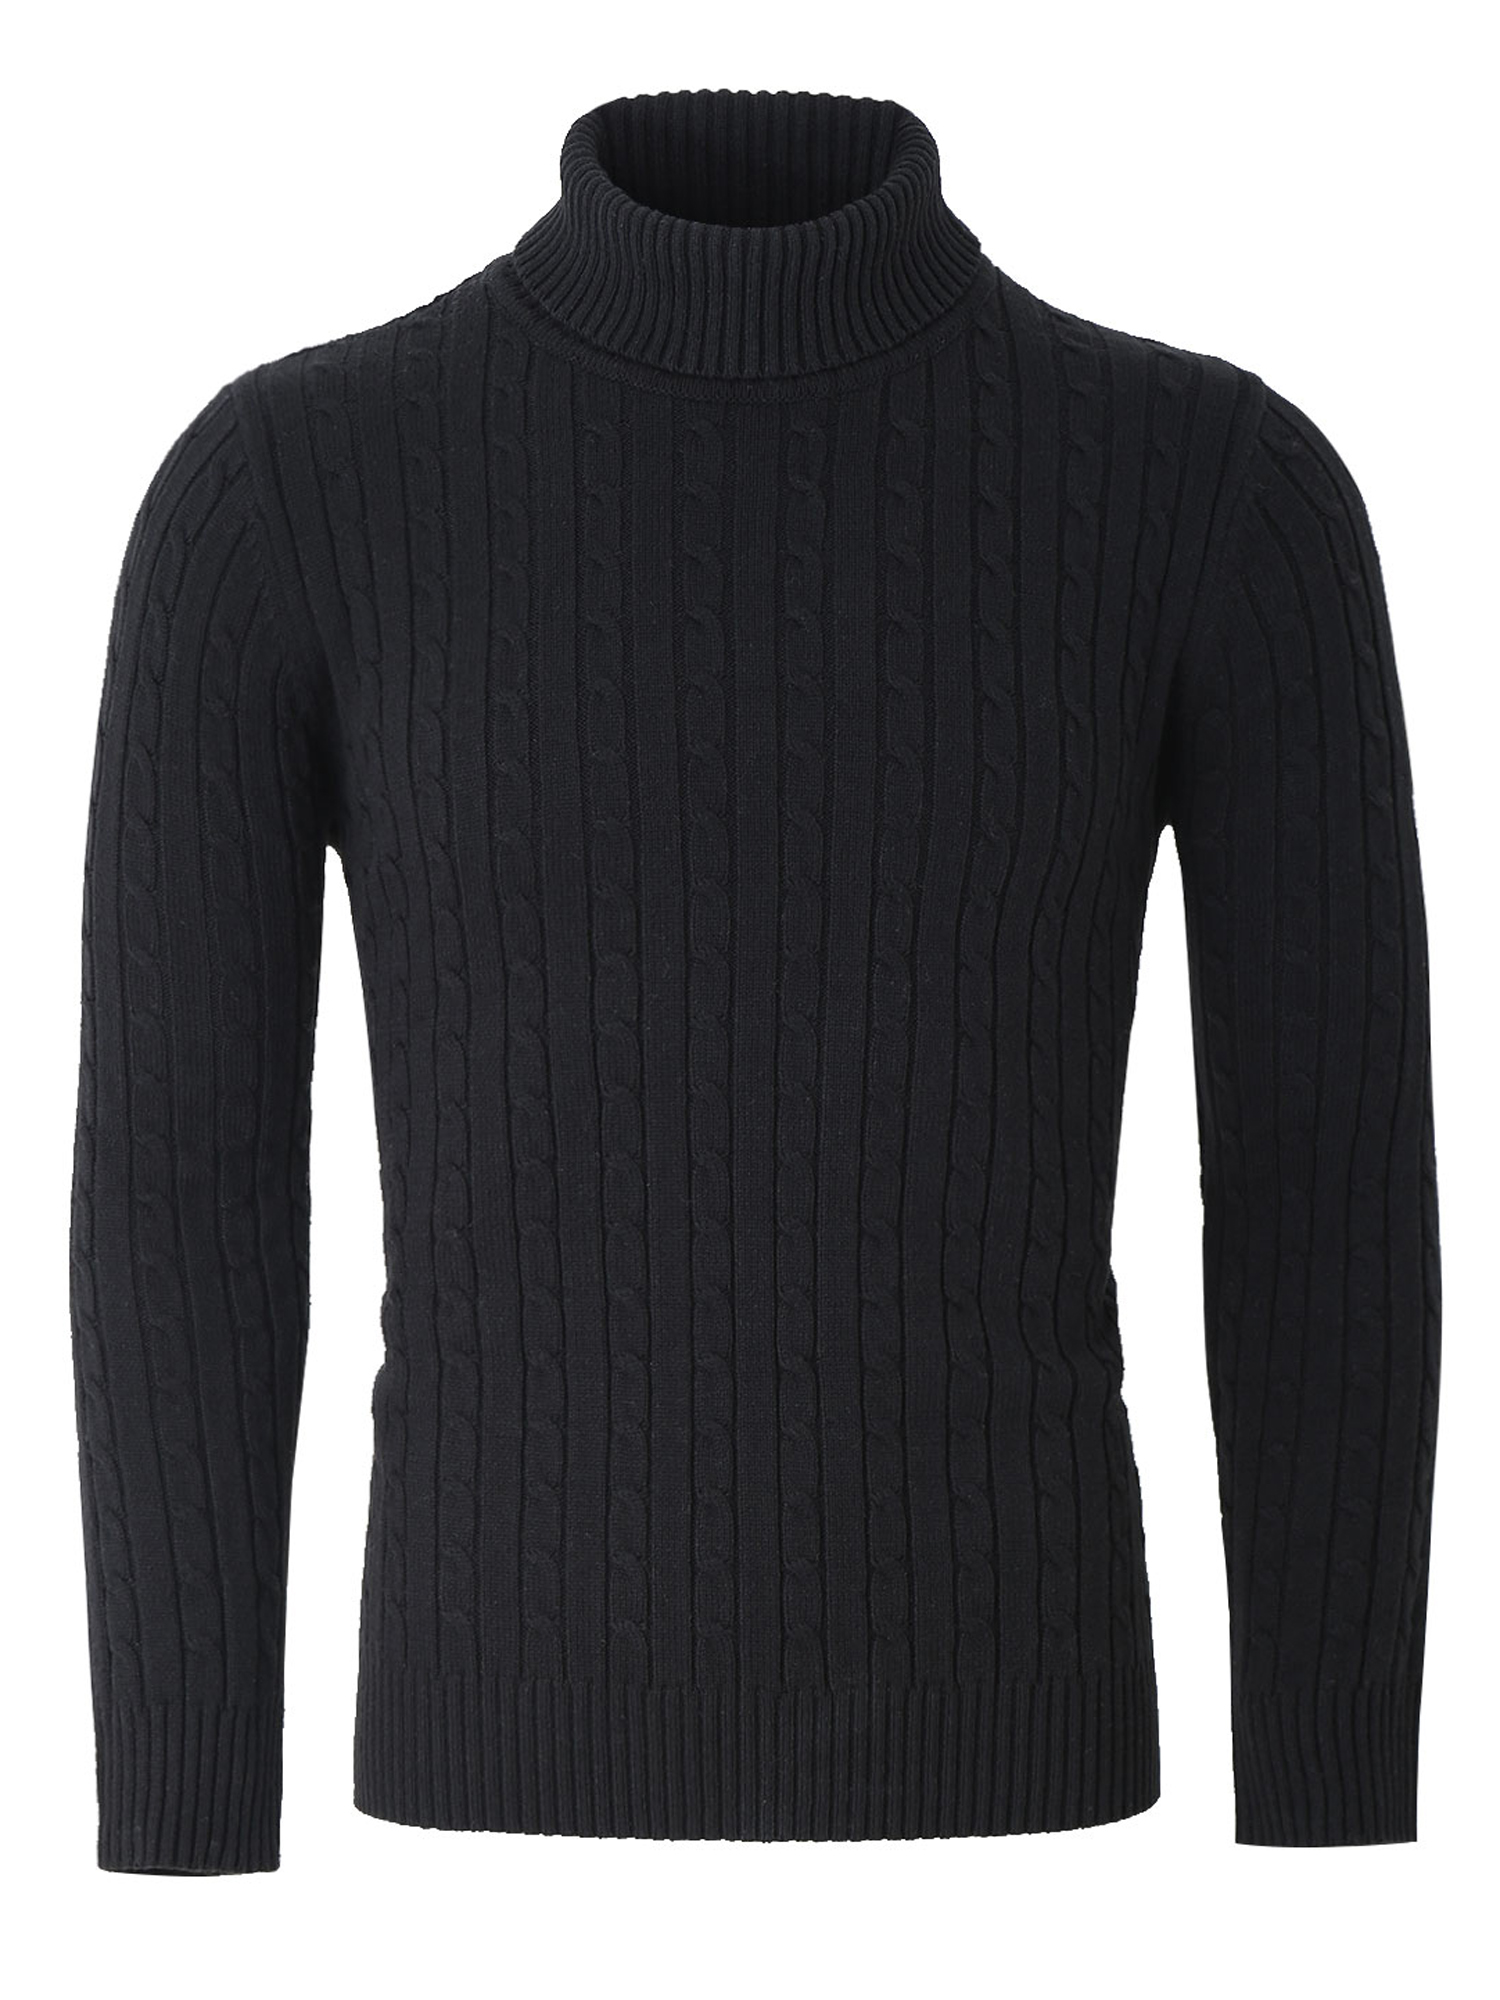 Unique Bargains Men's Turtleneck Long Sleeves Pullover Cable Knit Sweater - image 2 of 7